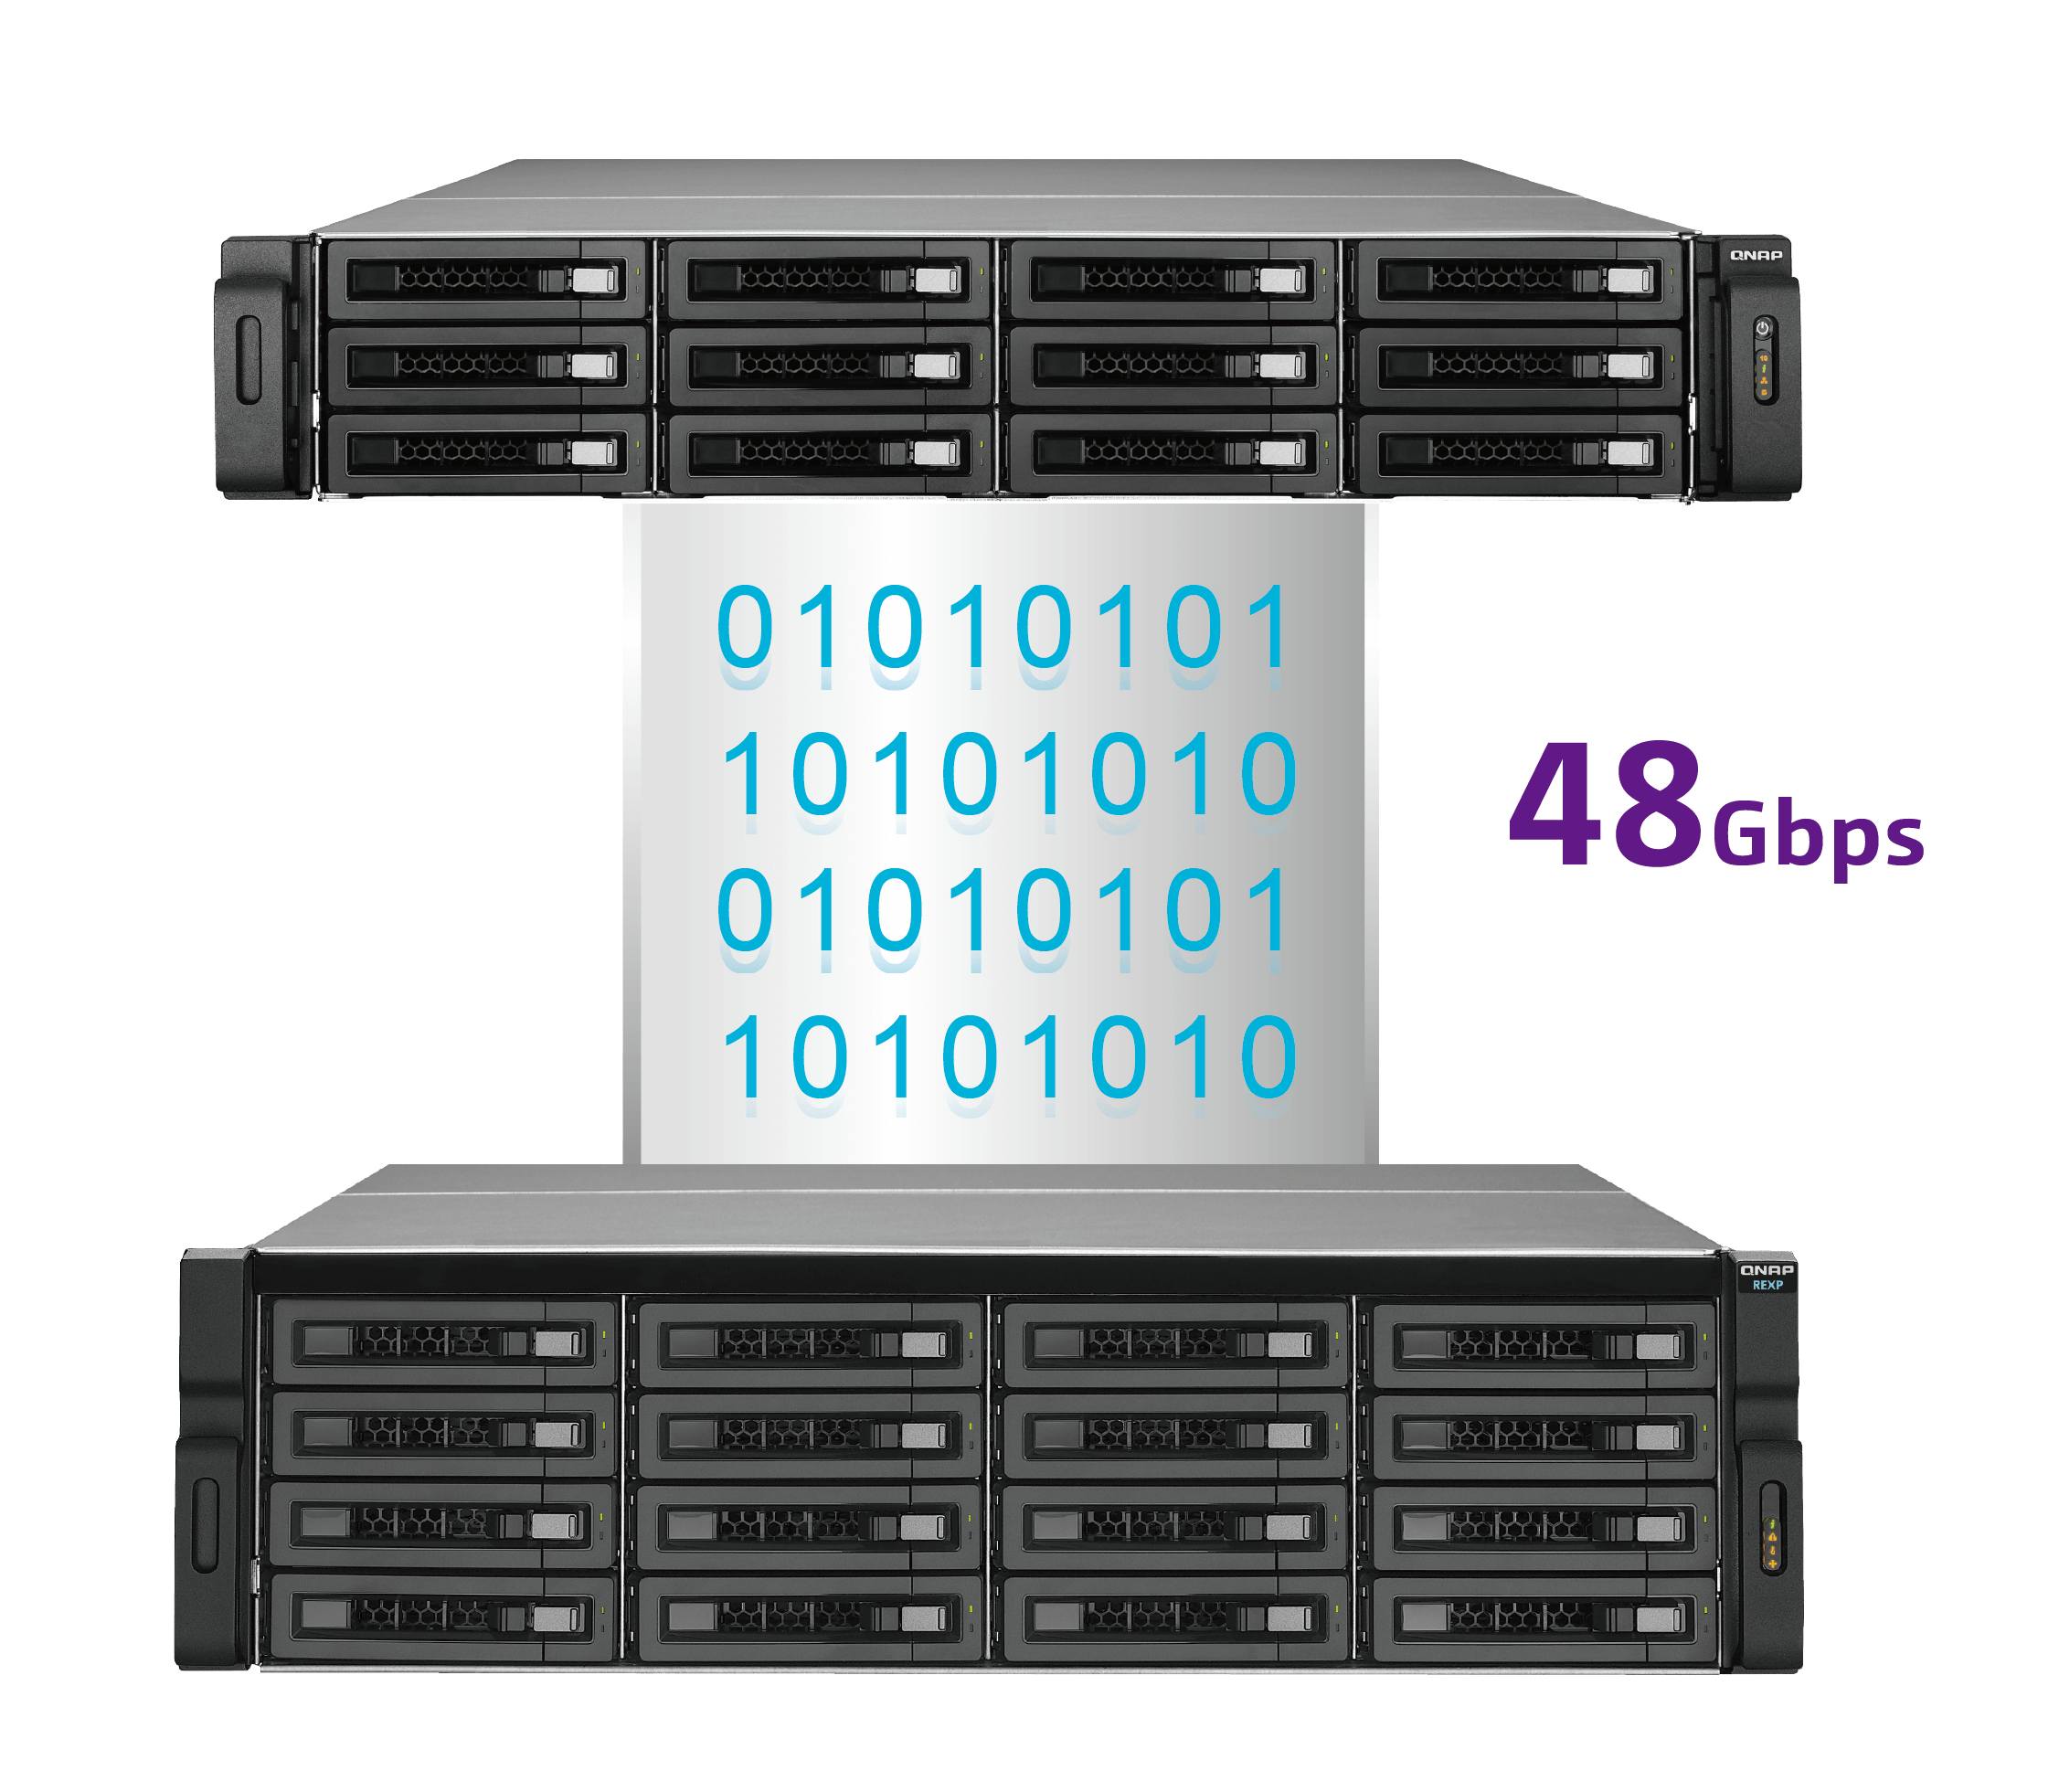 High Density, efficiency and scalability